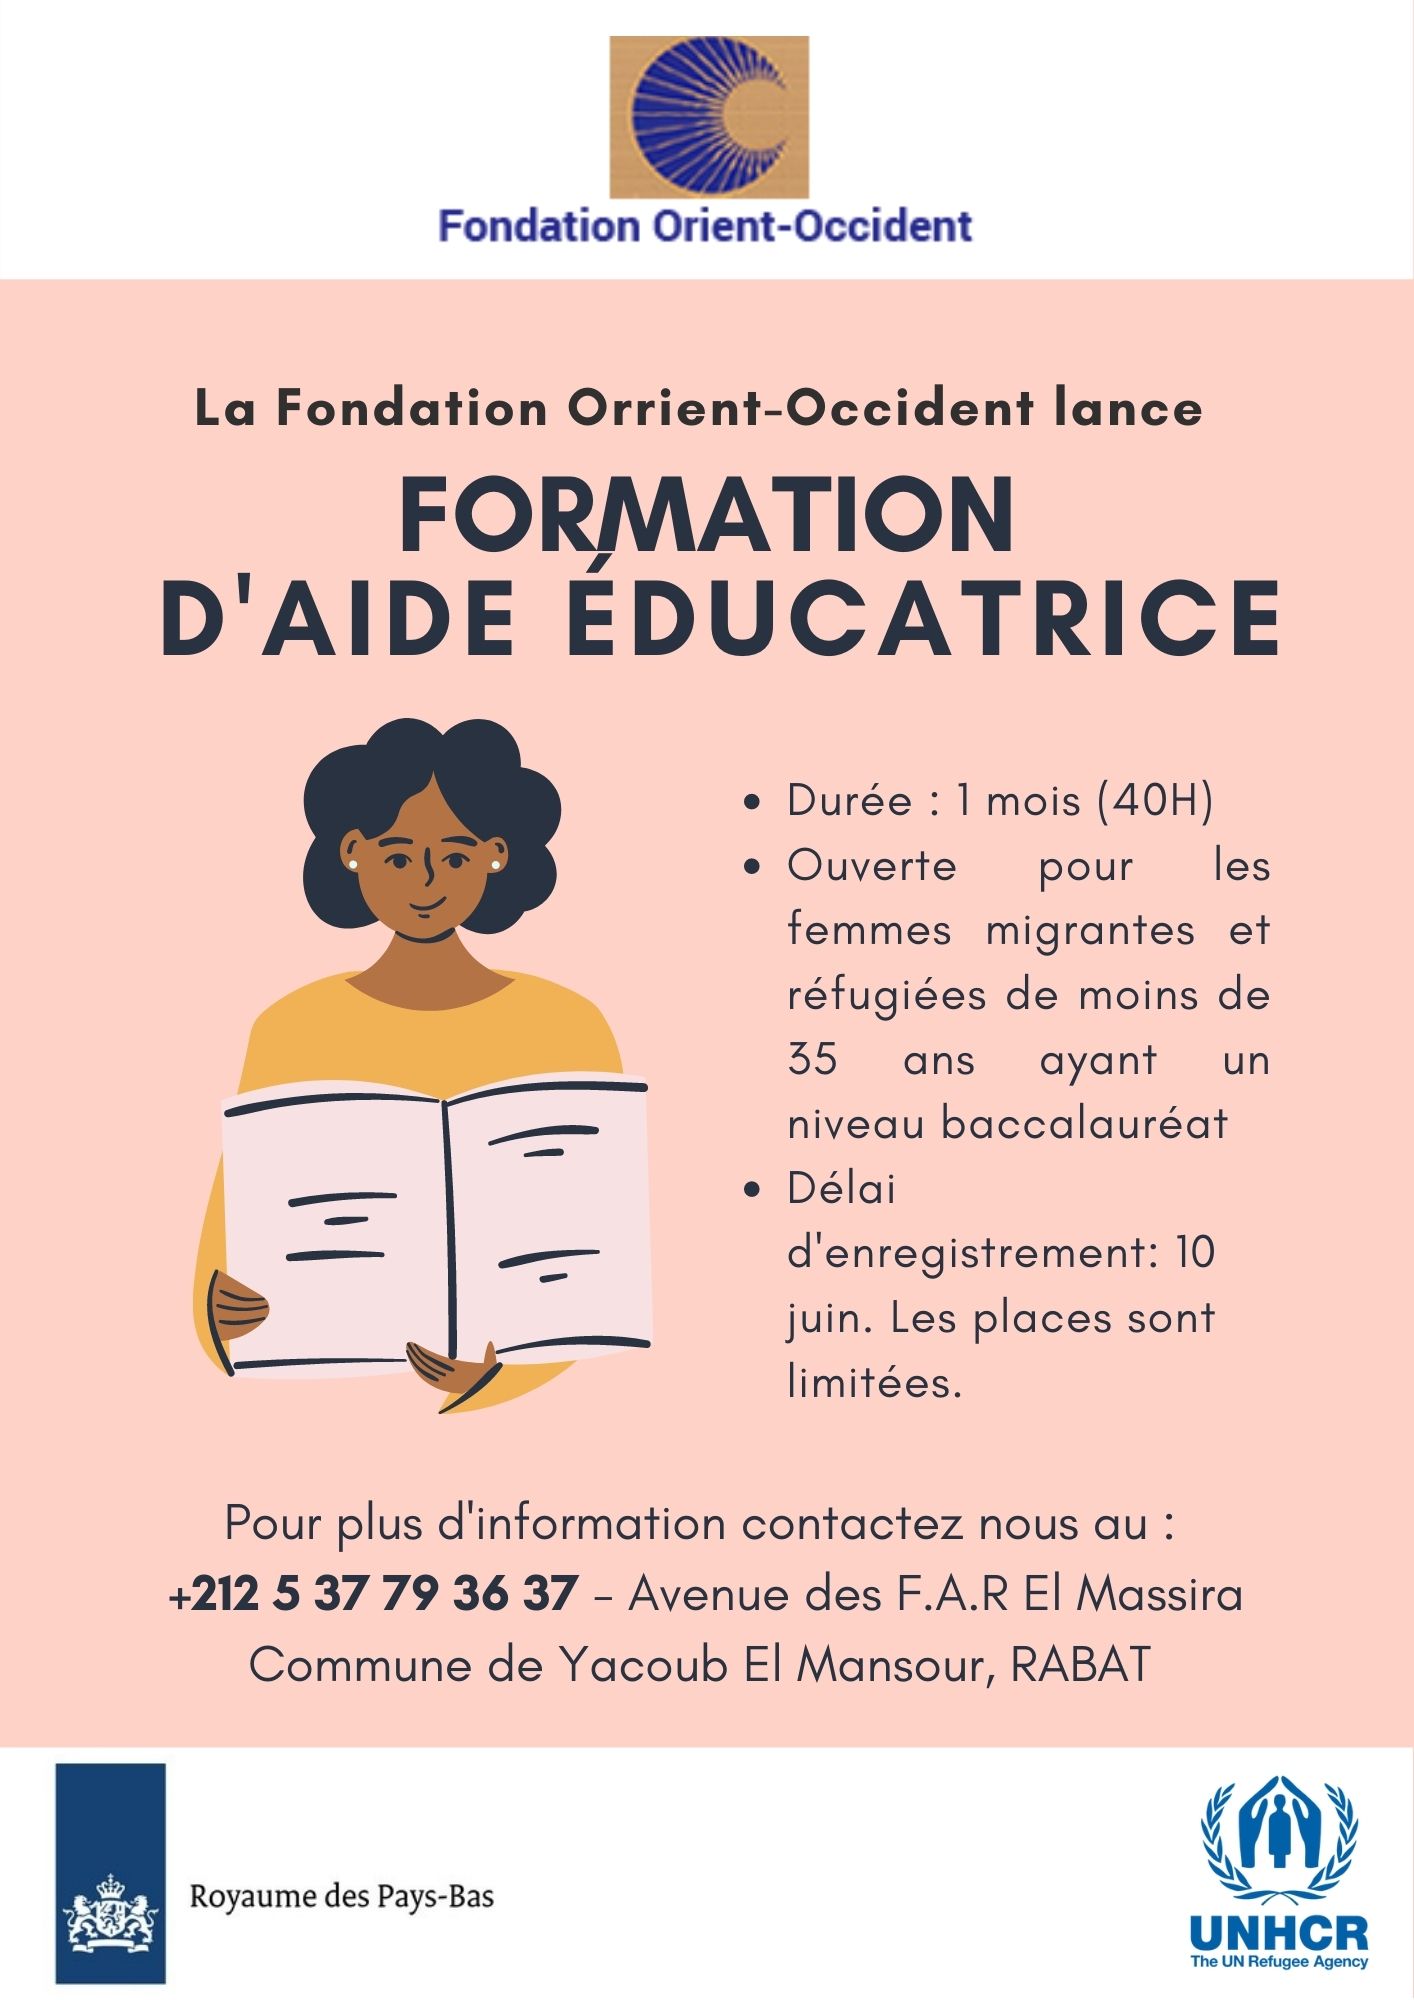 New educational assistant training at the Fondation Orient-Occident in Rabat